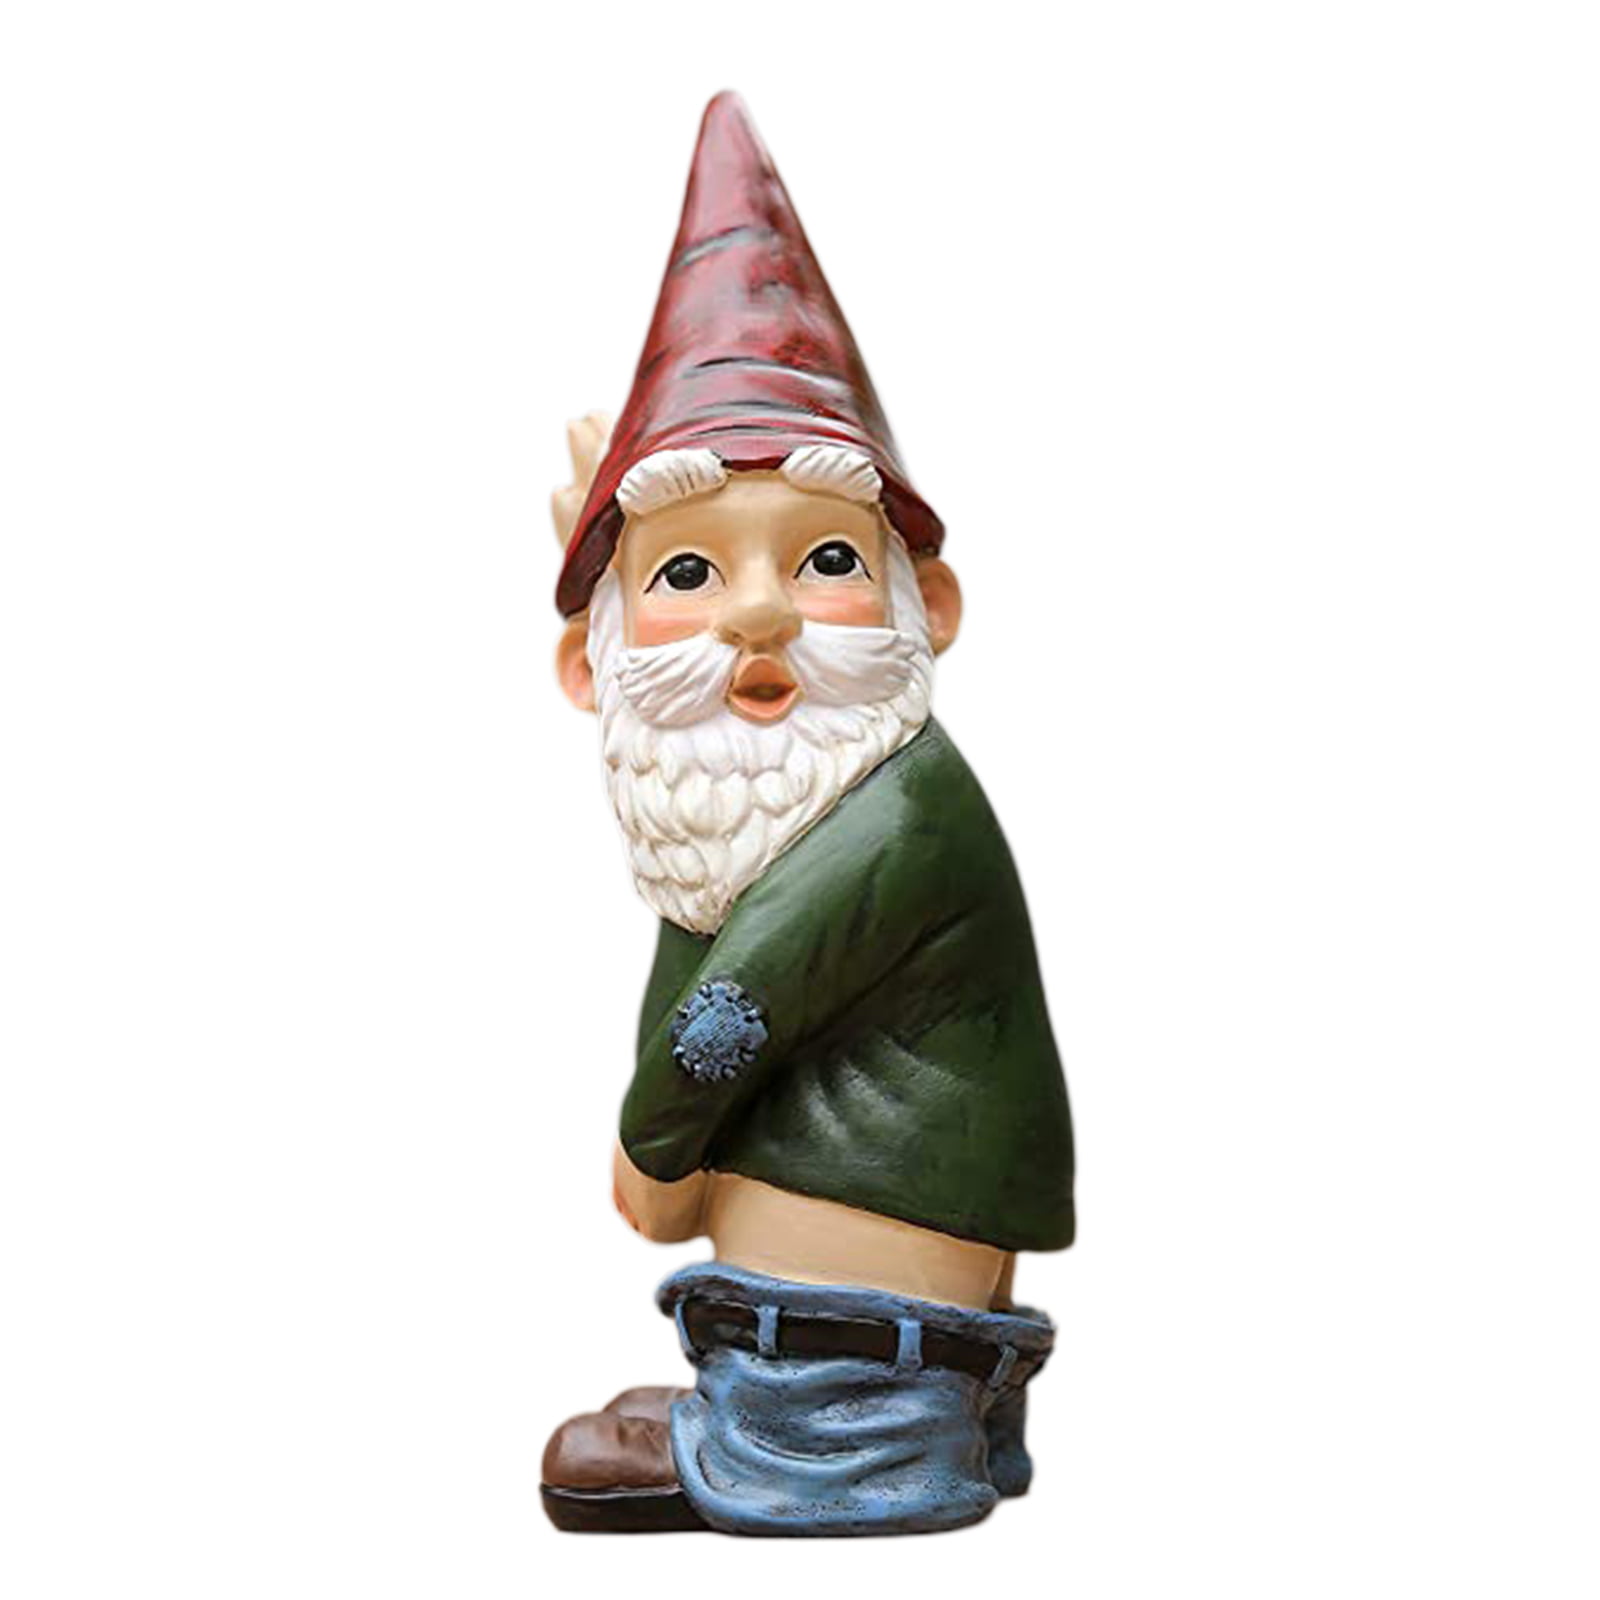 Garden Lawn Resin Naughty Peeing Gnome Ornament Funny Dwarfs Outdoor Decors New 